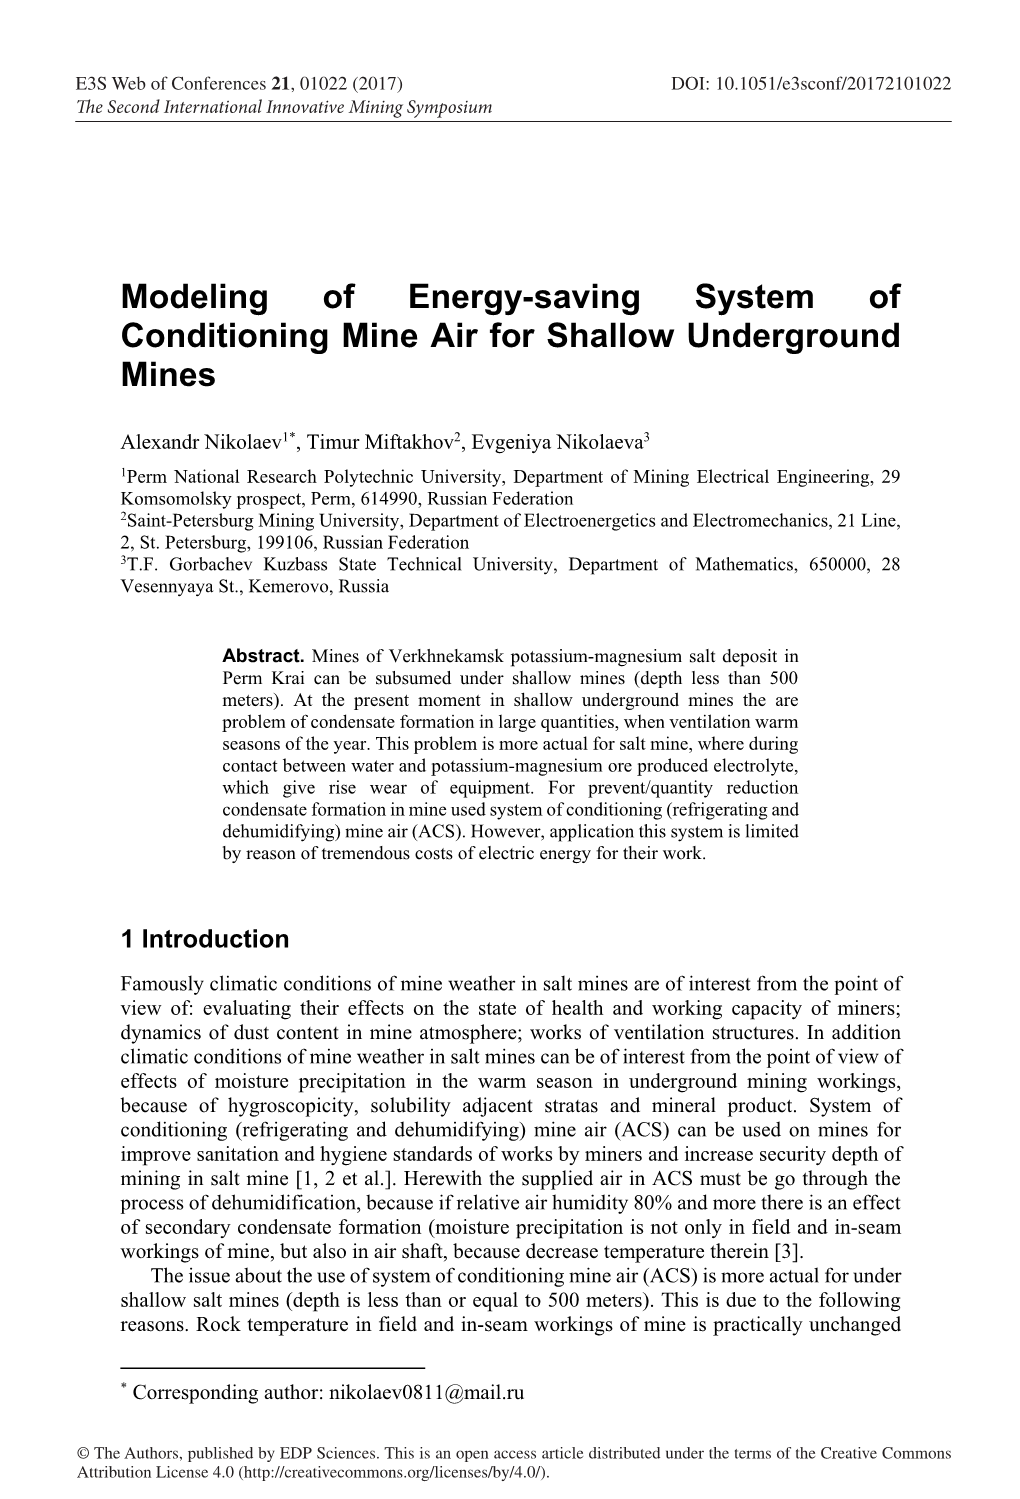 Modeling of Energy-Saving System of Conditioning Mine Air for Shallow Underground Mines